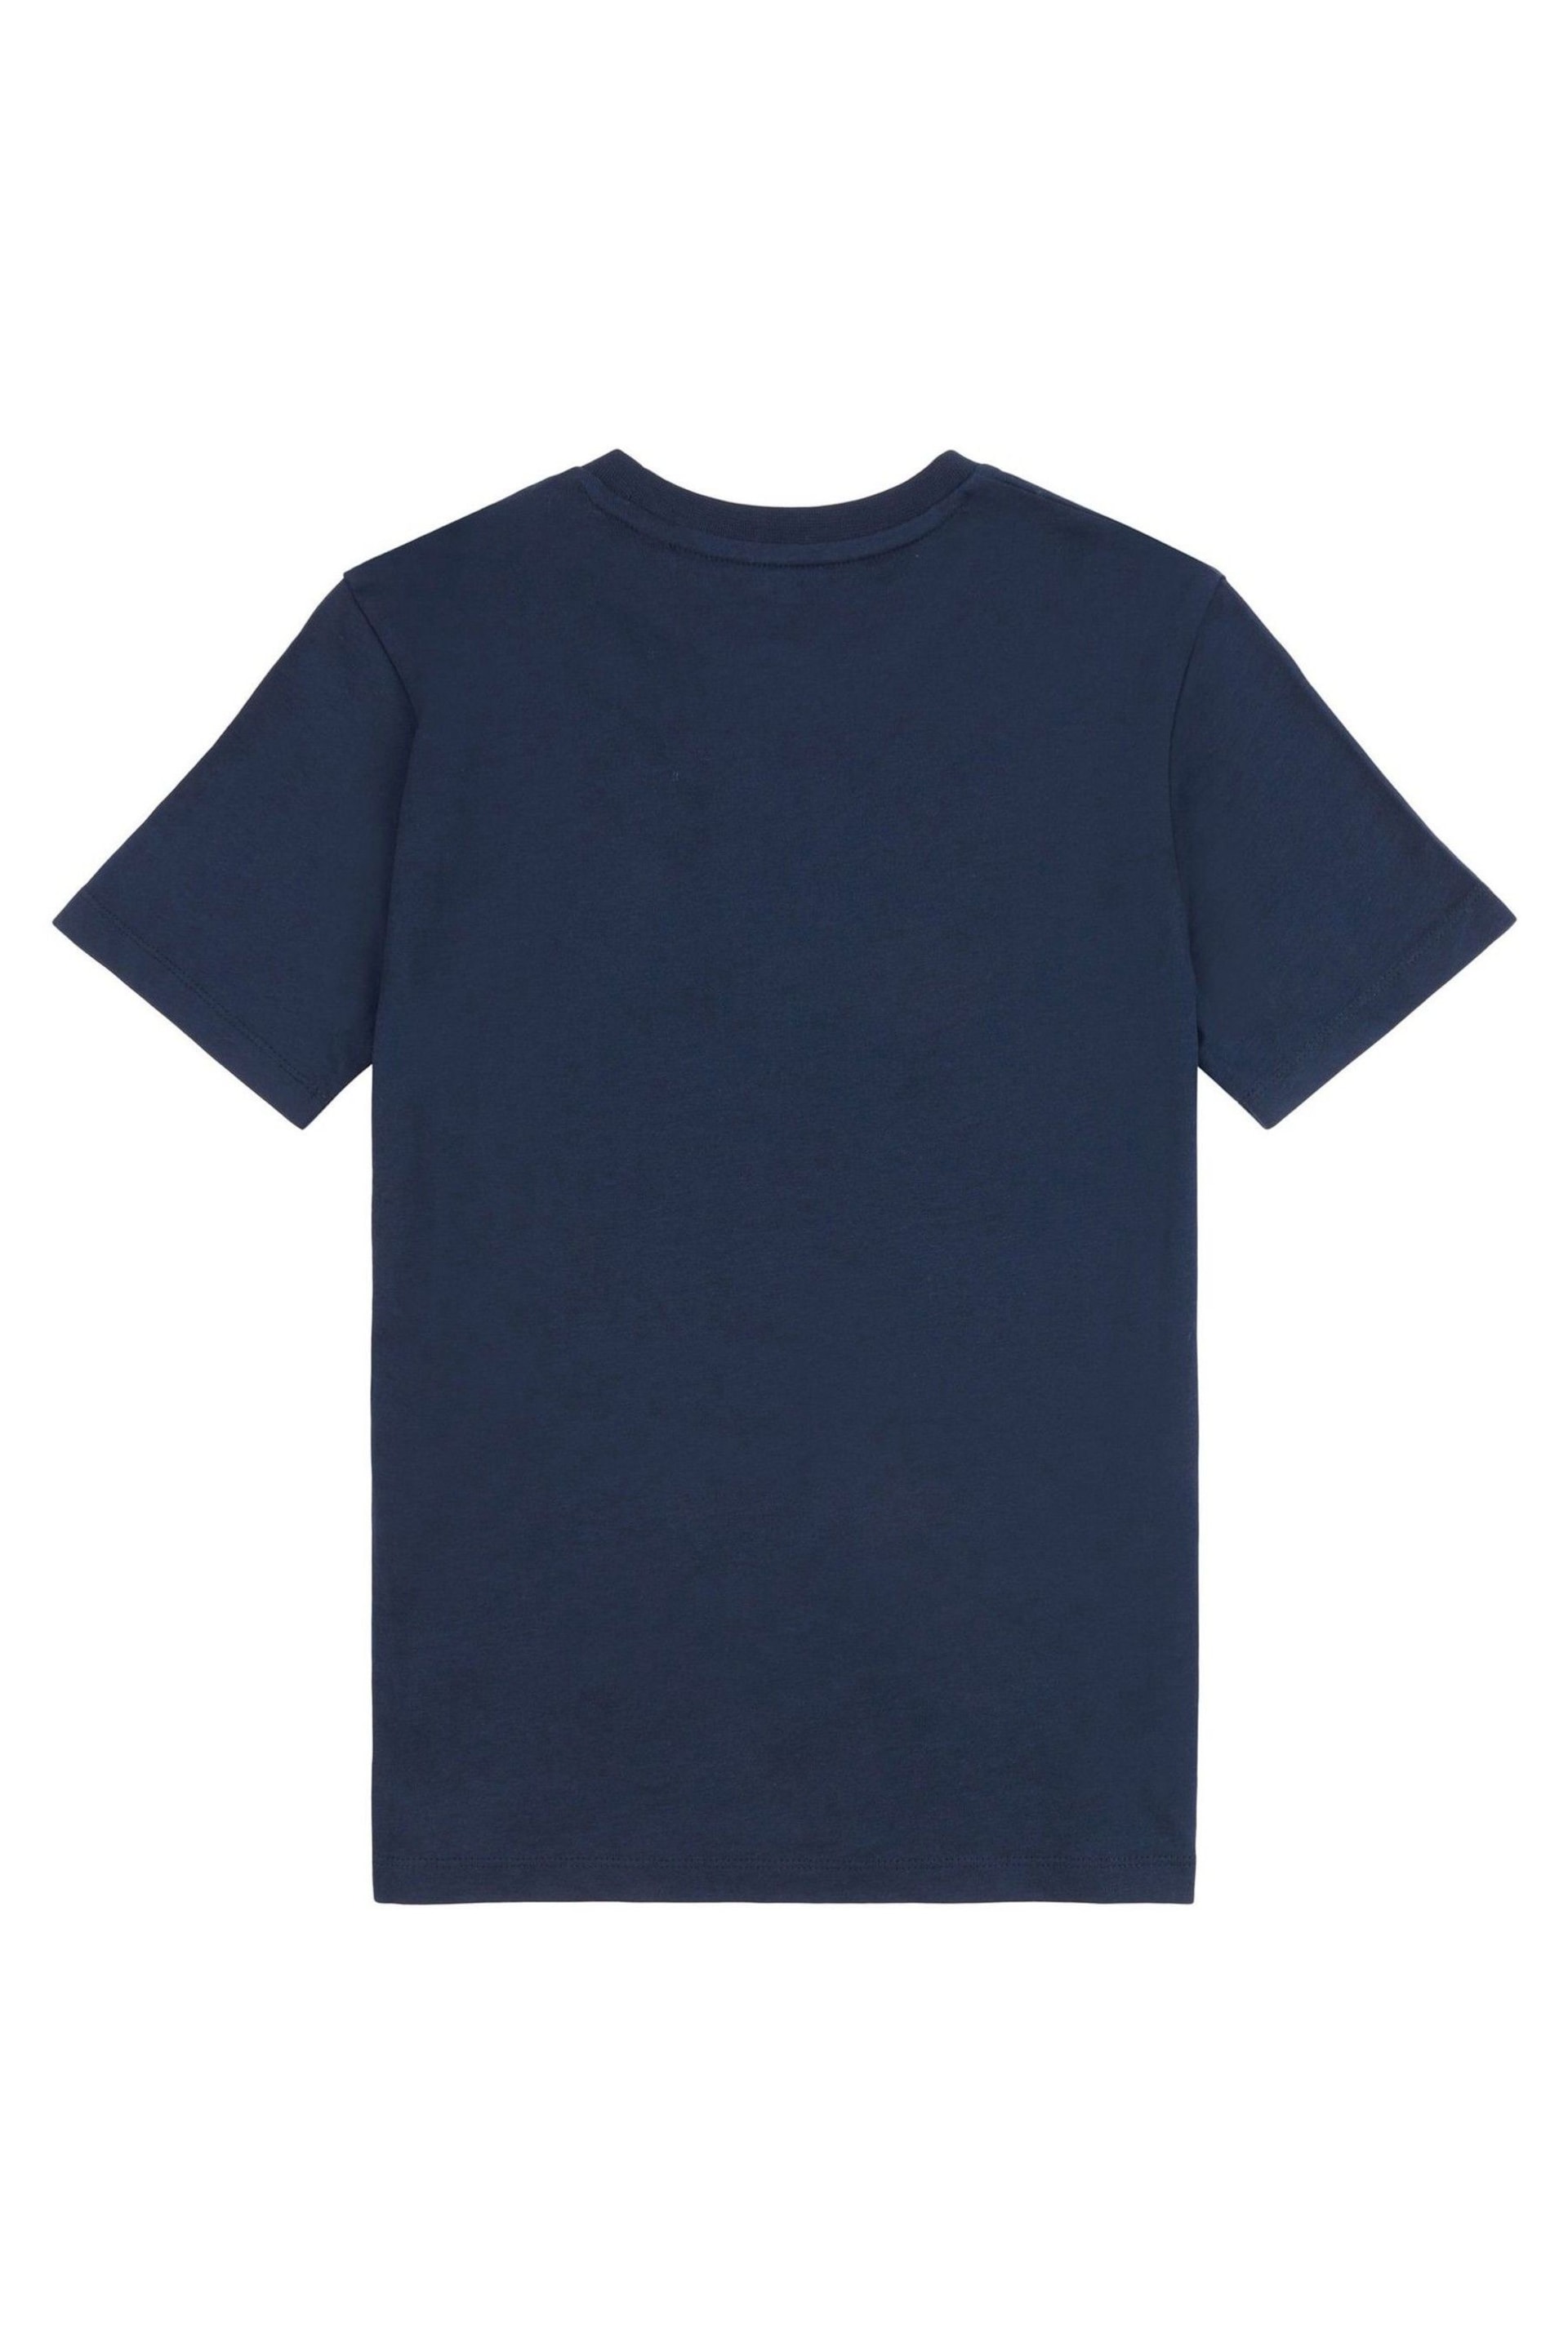 Jack Wills Boys Regular Fit Carnaby T-Shirt - Image 6 of 6